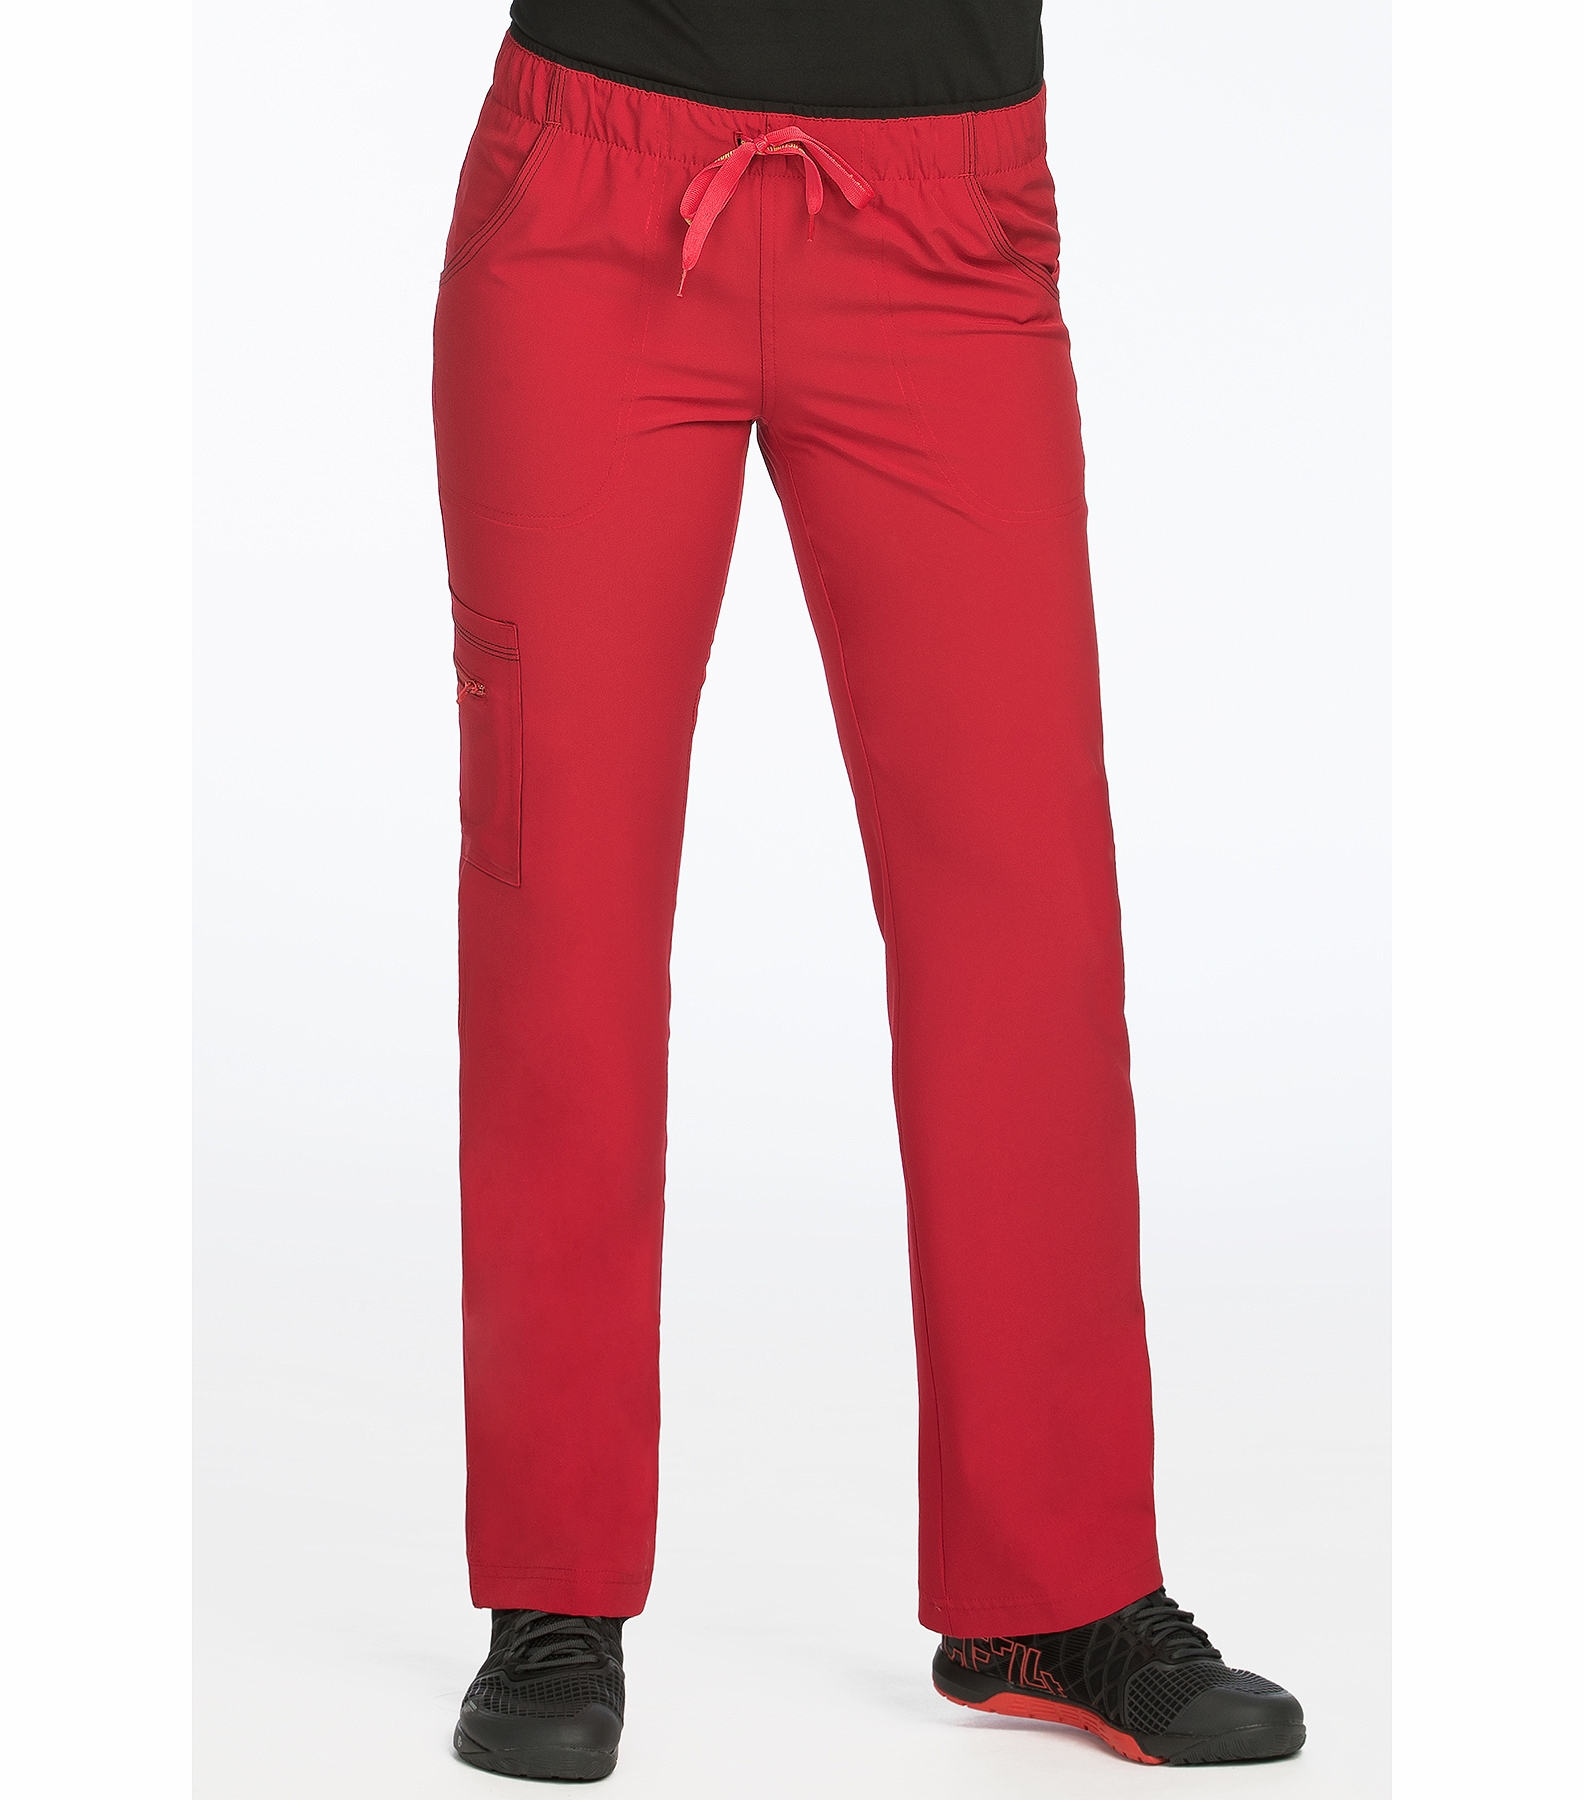 https://medicalscrubscollection.com/content/images/thumbs/0492482_med-couture-activate-womens-color-block-pant-8751.jpeg